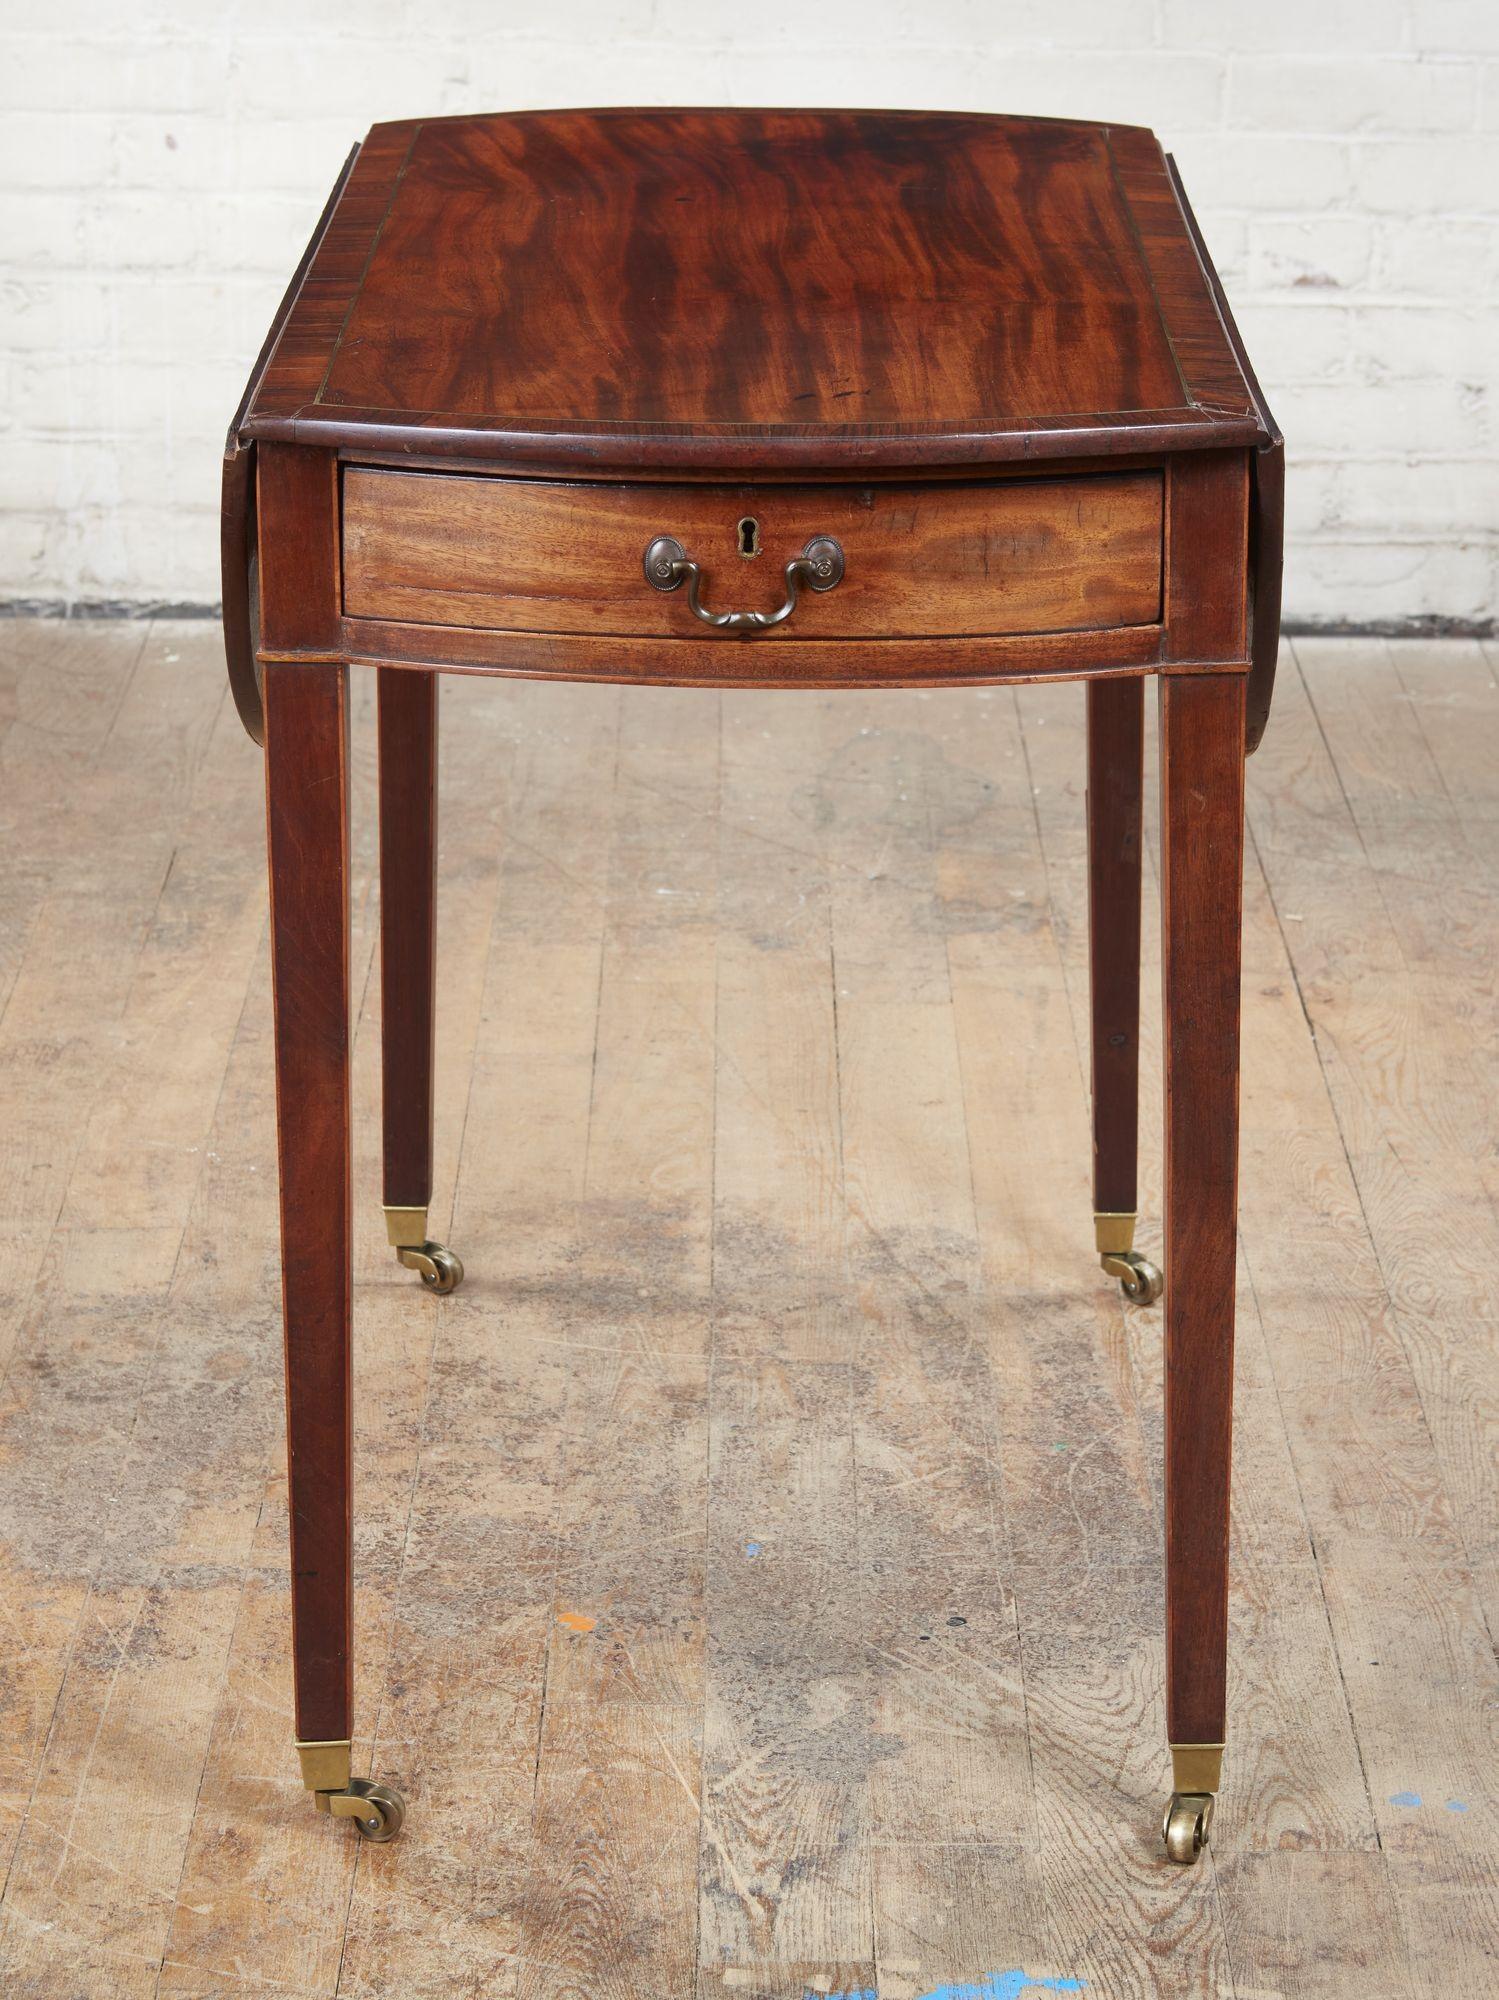 Fine George III mahogany Pembroke table with rosewood cross banding and brass string inlay, the oval top with fine graining, over single drawer with ebony sting edge inlay, retaining original swan-neck pull over square tapered legs ending in